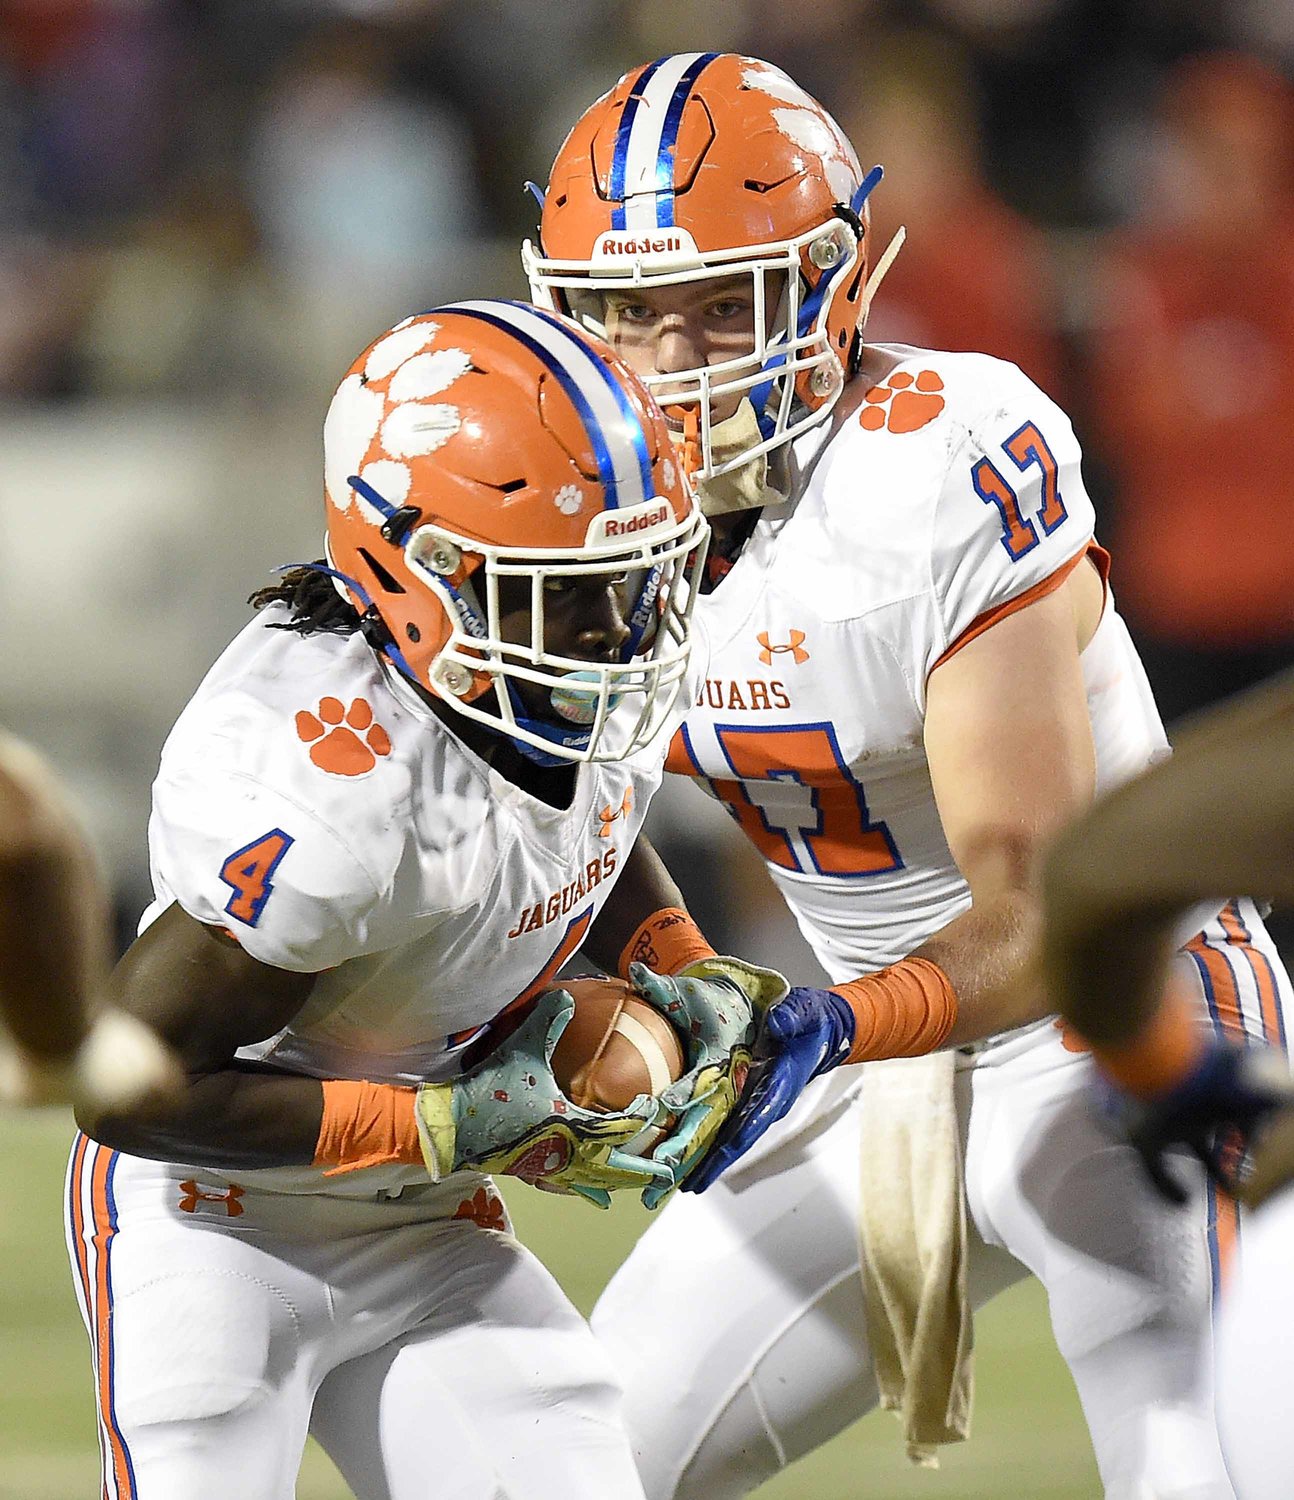 Madison Central's De'andre Pullen (4) takes the handoff from quarterback Jake Norris in the MHSAA Class 6A Football State Championship game.